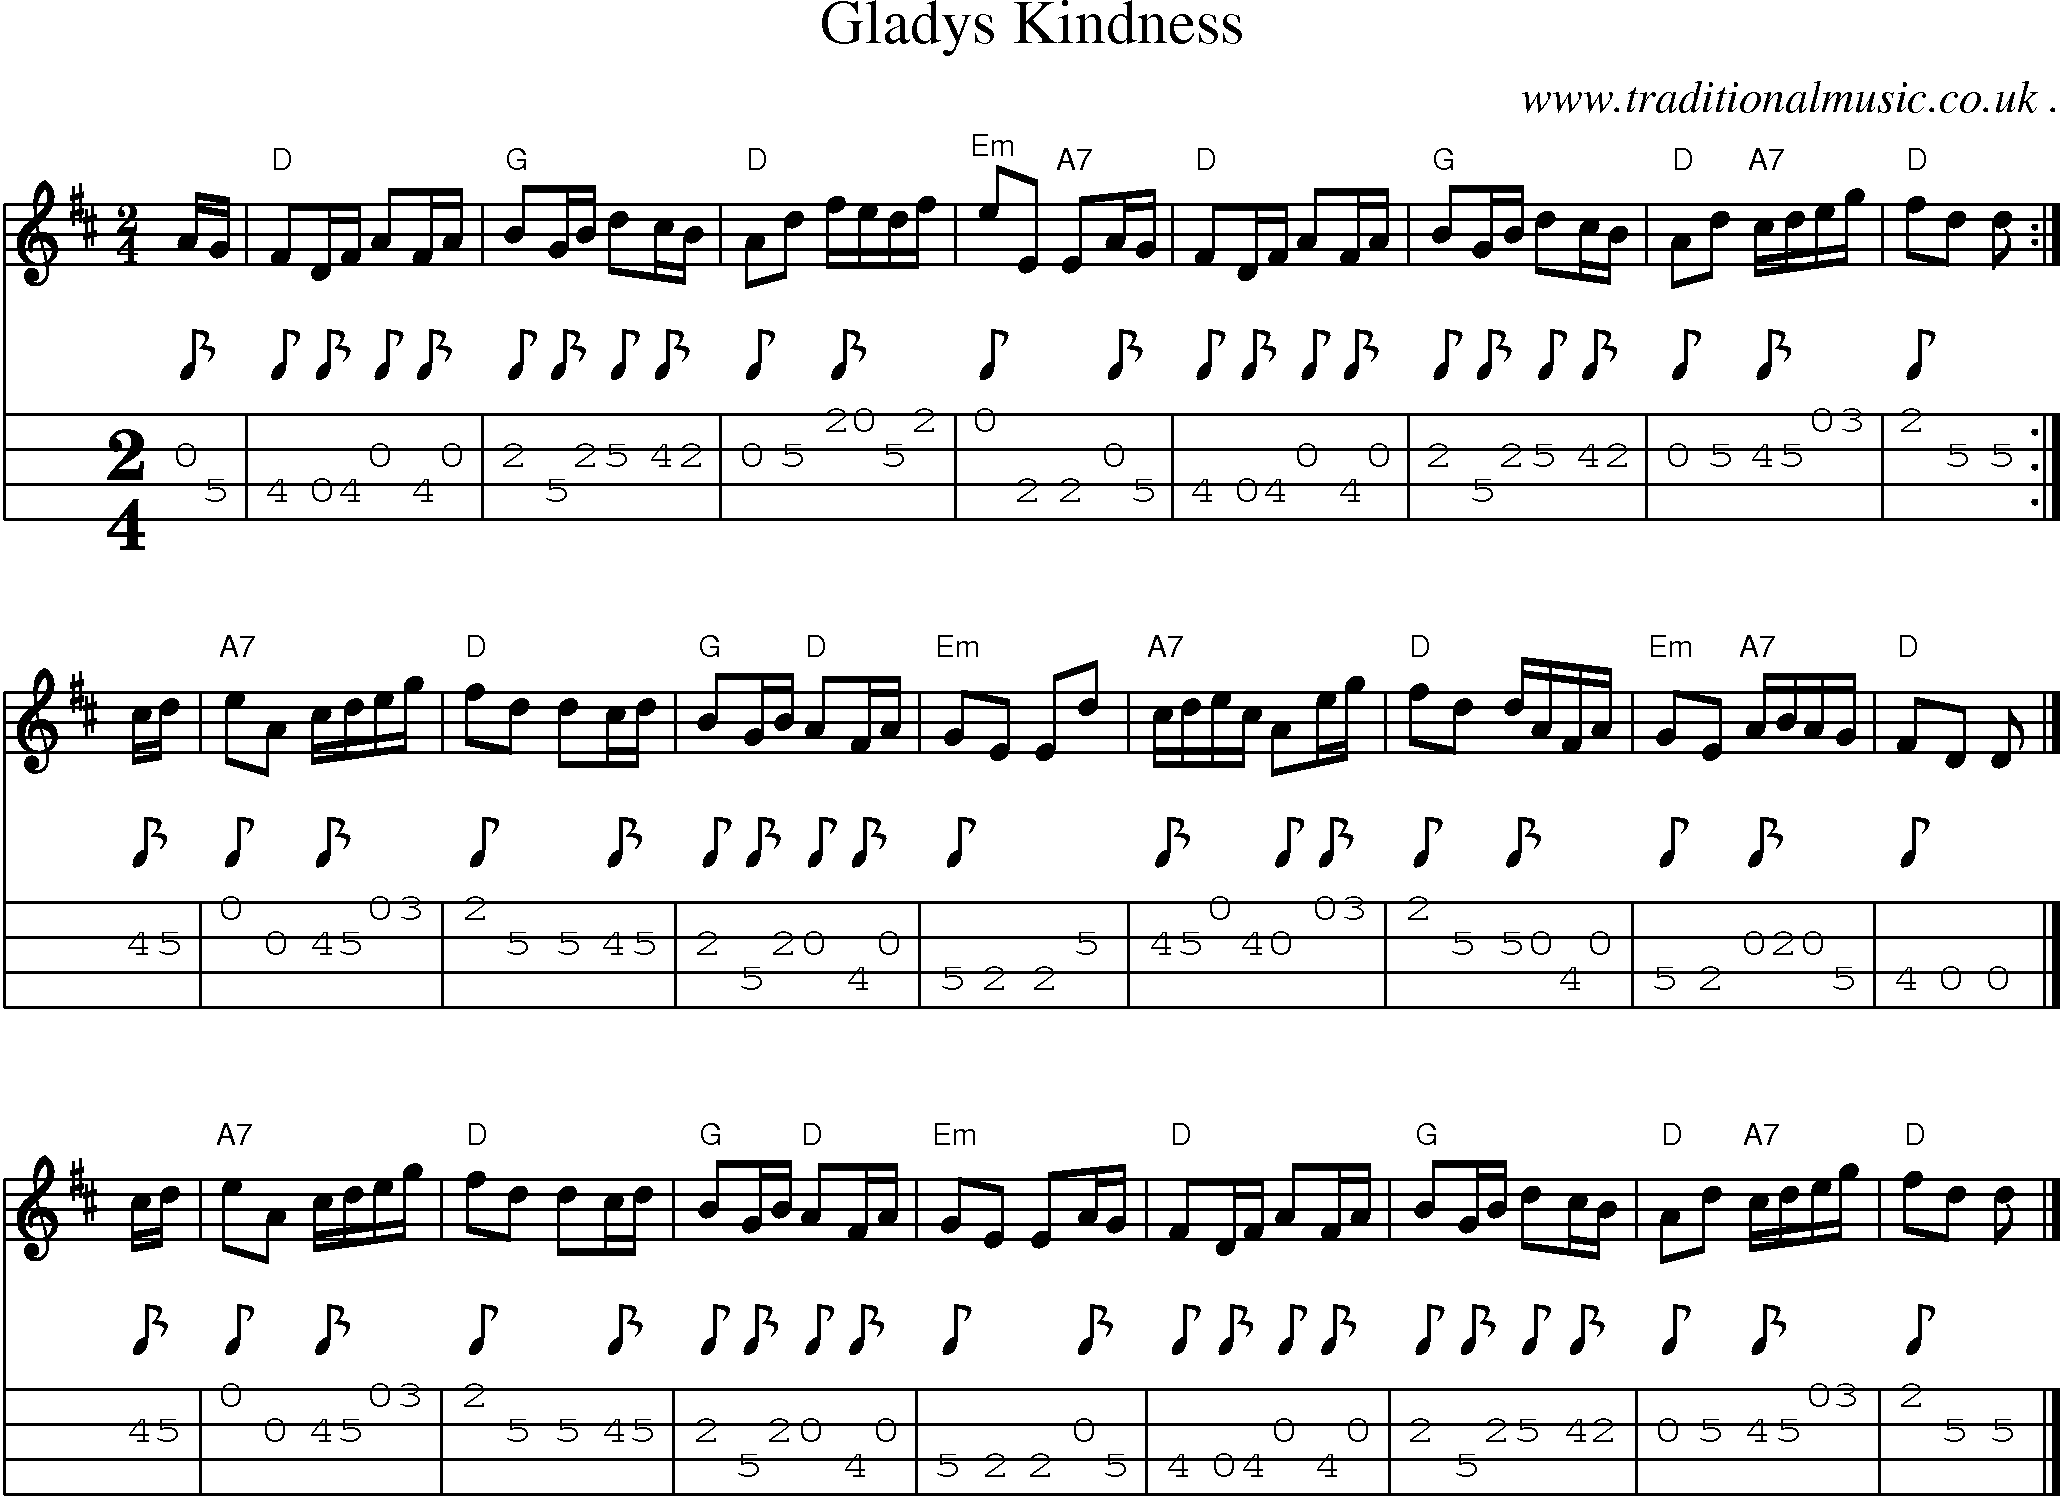 Sheet-music  score, Chords and Mandolin Tabs for Gladys Kindness